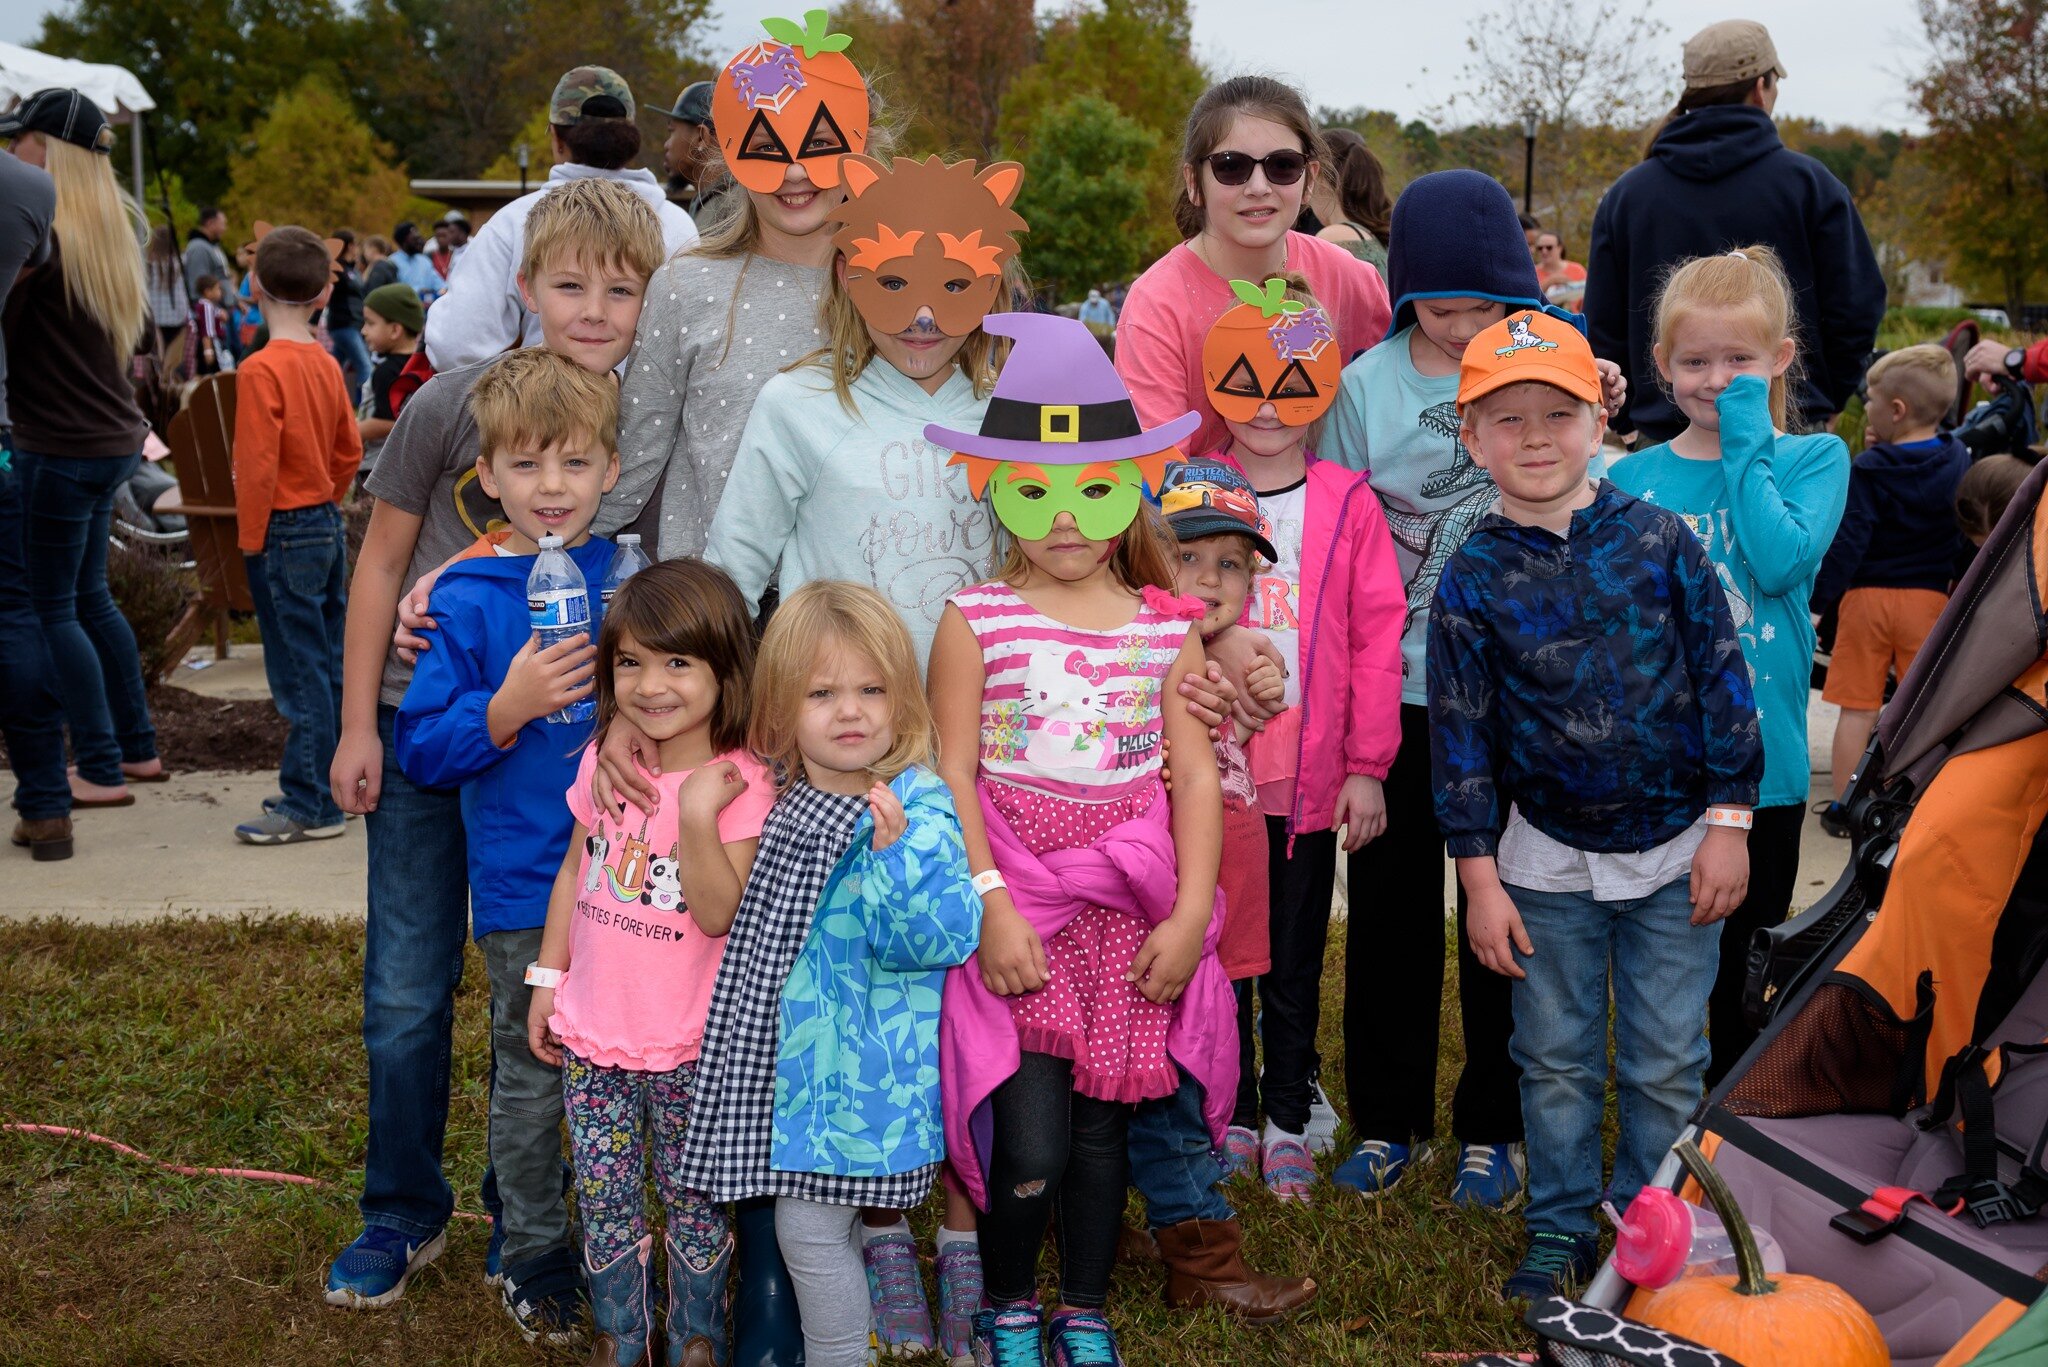 Fall Festival Fun Community Event at Fort Belvoir